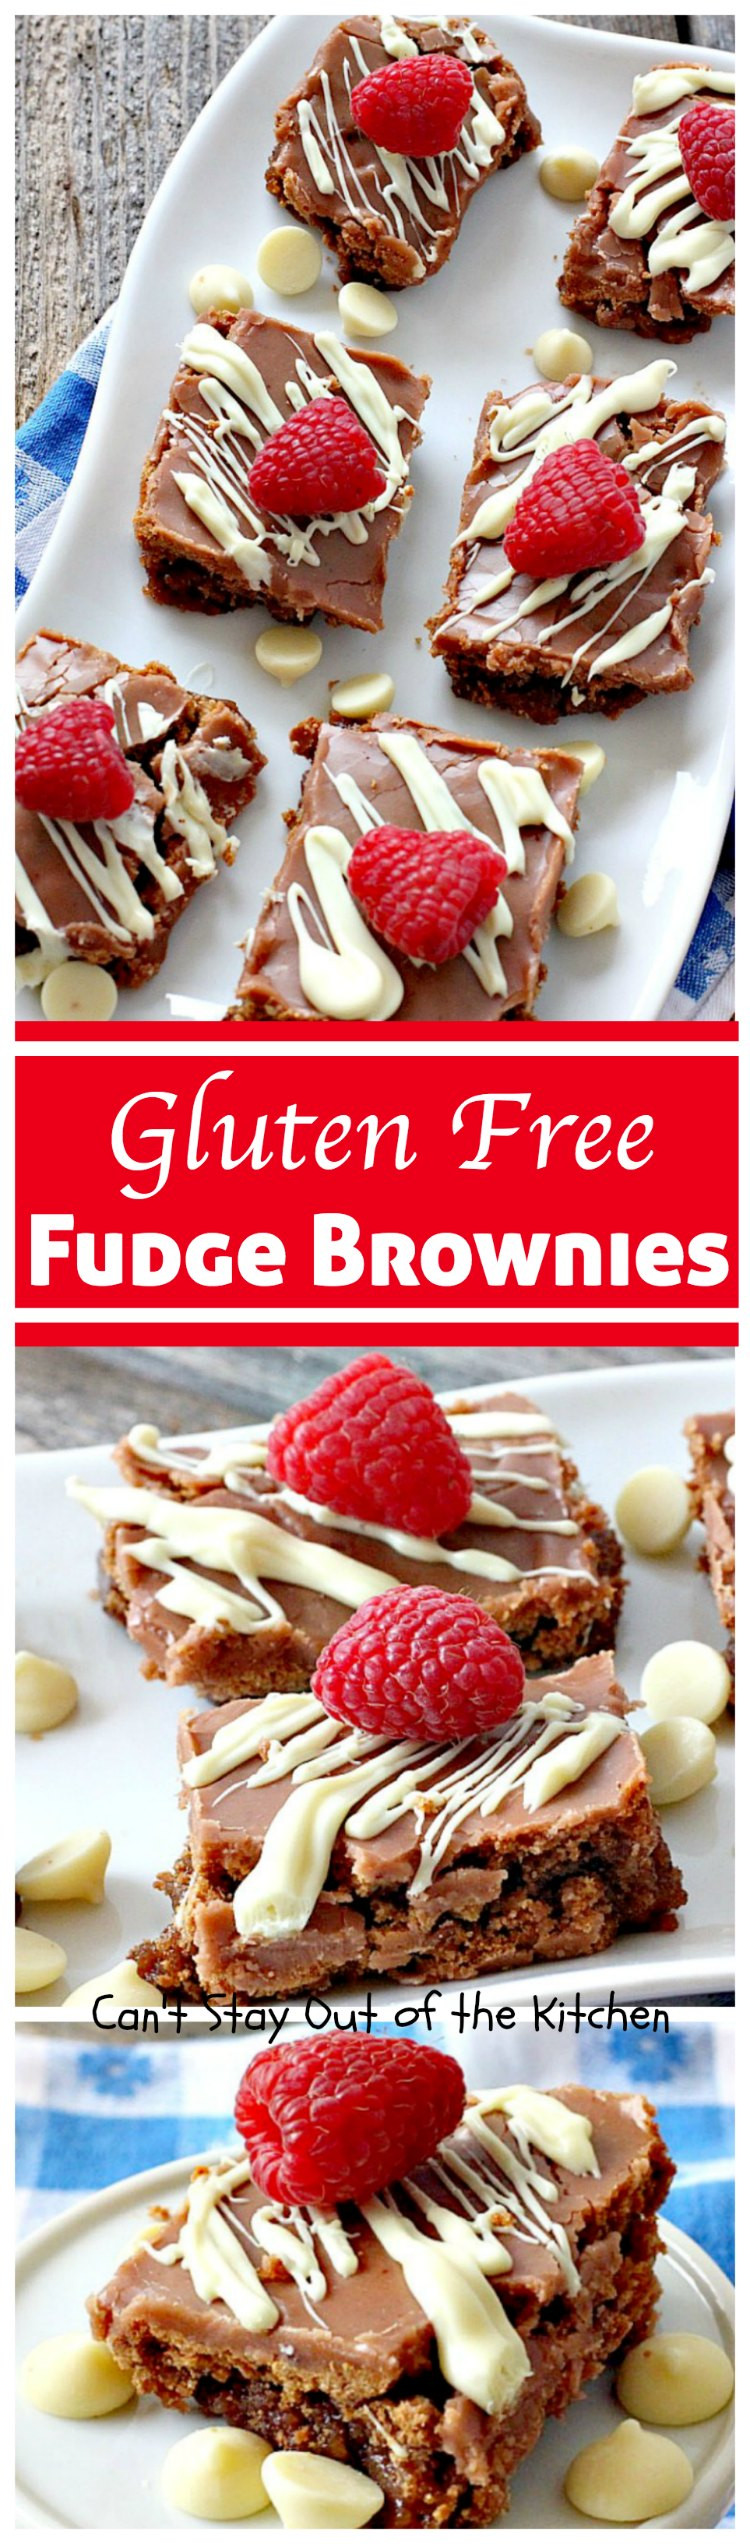 Gluten Free Fudge Brownies
 Gluten Free White Chocolate Brownies Can t Stay Out of